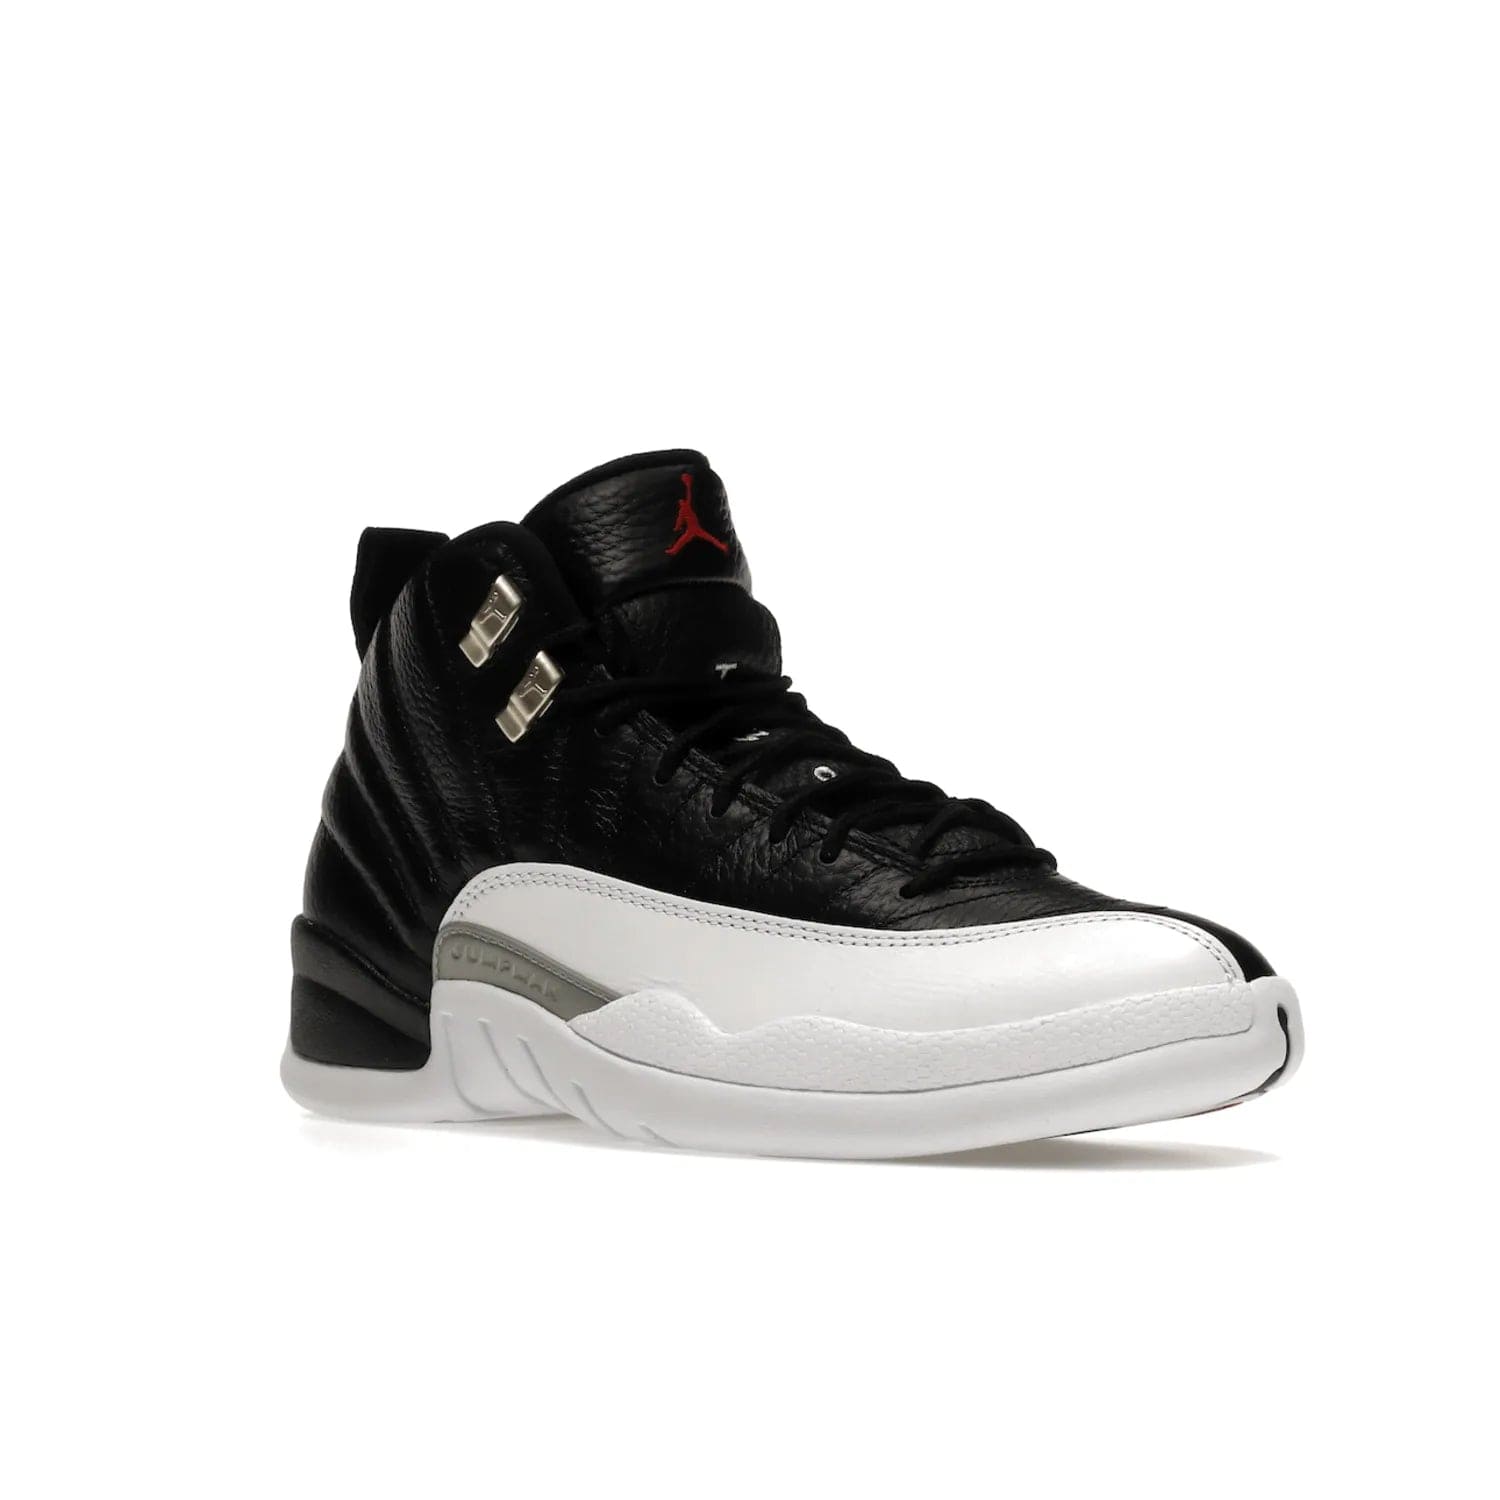 Jordan 12 Retro Playoffs (2022) - Image 5 - Only at www.BallersClubKickz.com - Retro Air Jordan 12 Playoffs. Celebrate 25 years with MJ's iconic shoe. Black tumbled leather upper, white sole with carbon fiber detailing and Jumpman embroidery. Must-have for any Jordan shoe fan. Releases March 2022.